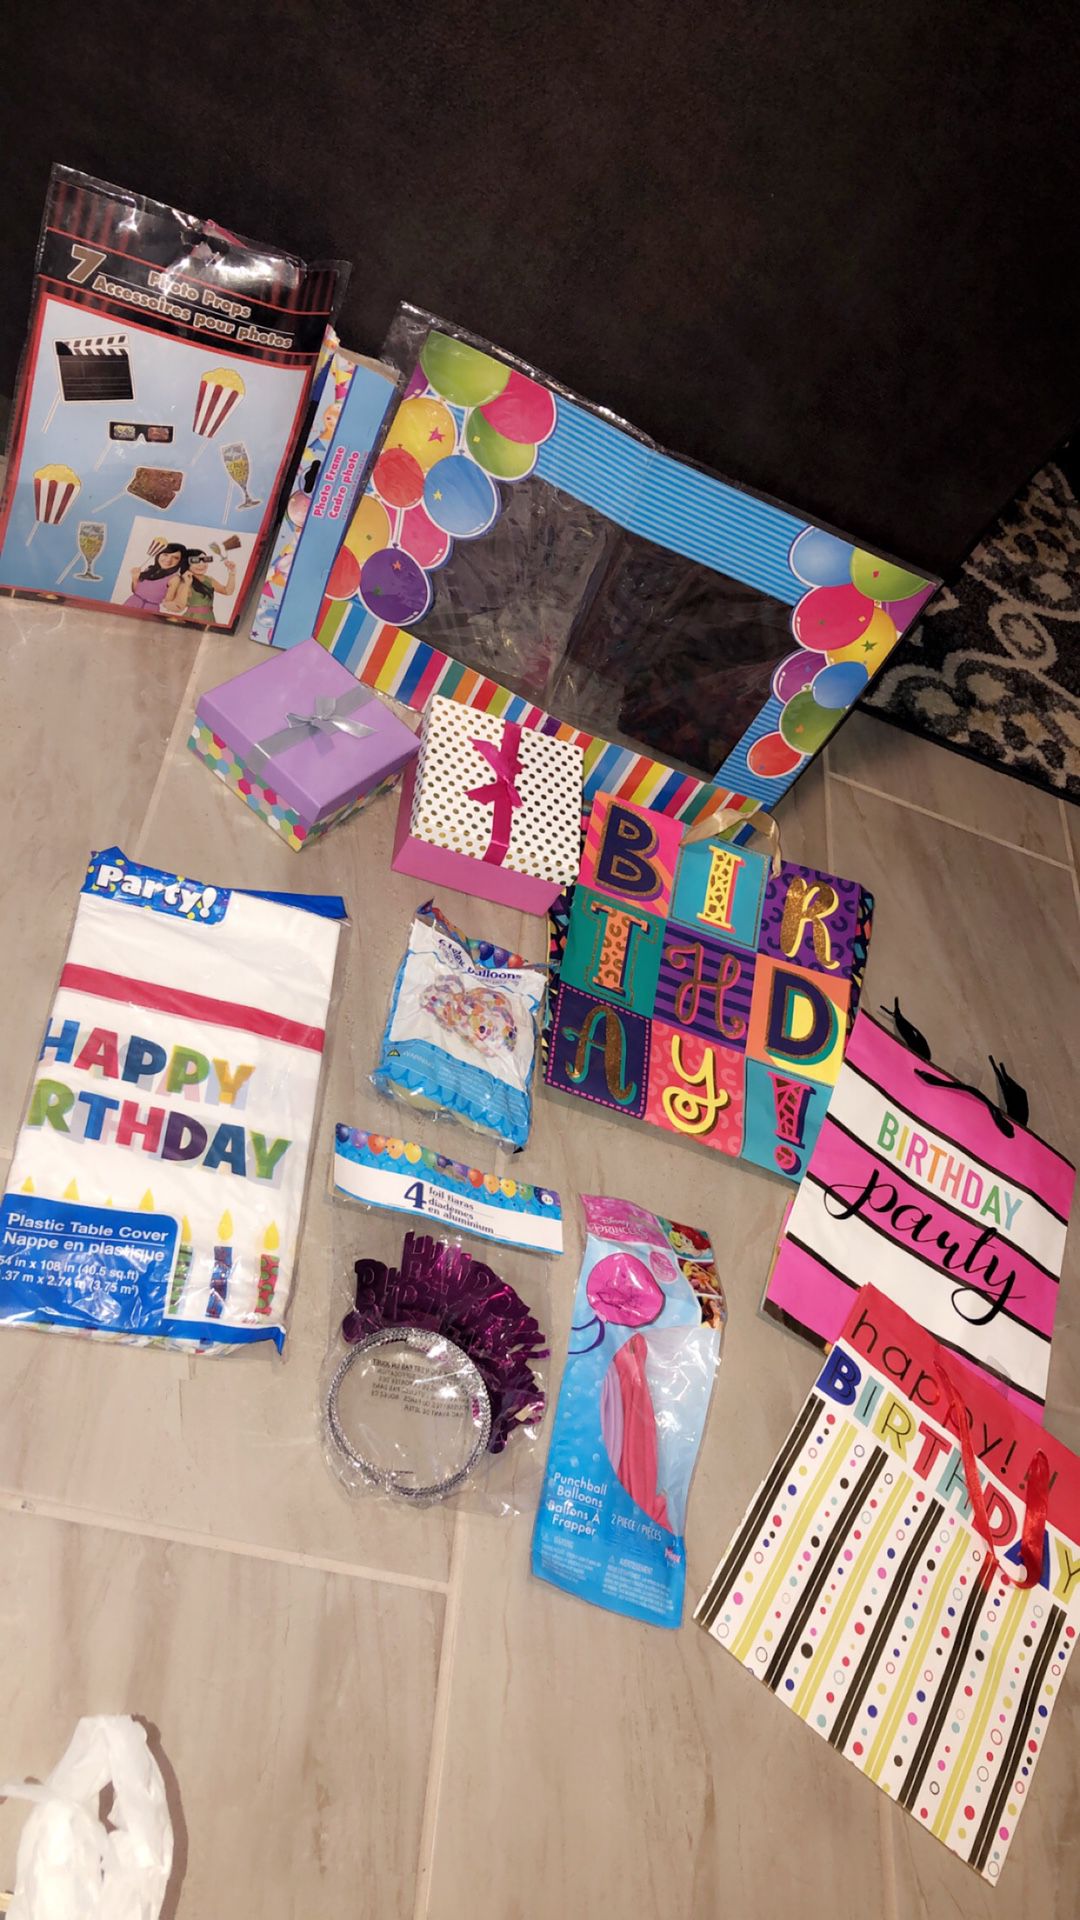 Birthday bags/boxes + misc